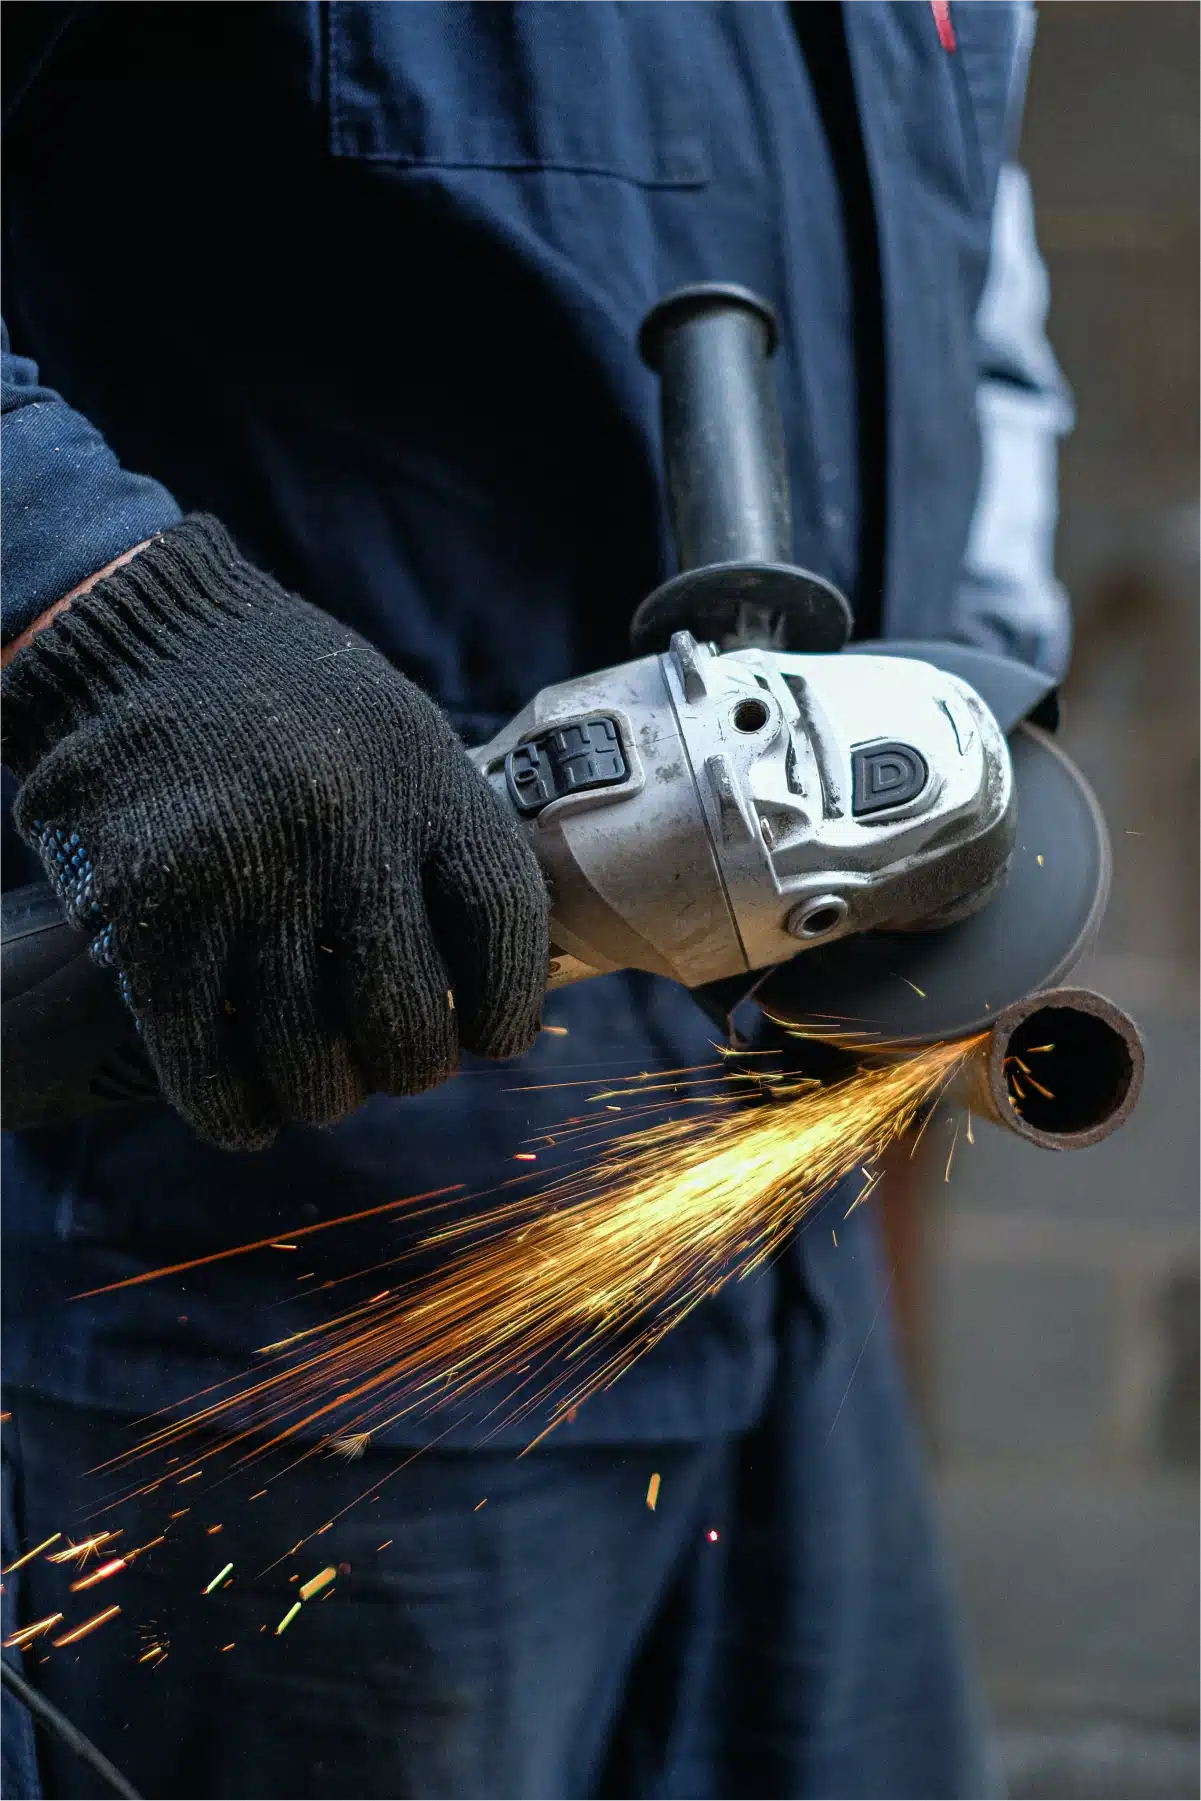 The Mighty Angle Grinder: More Than Just a Grinding Tool